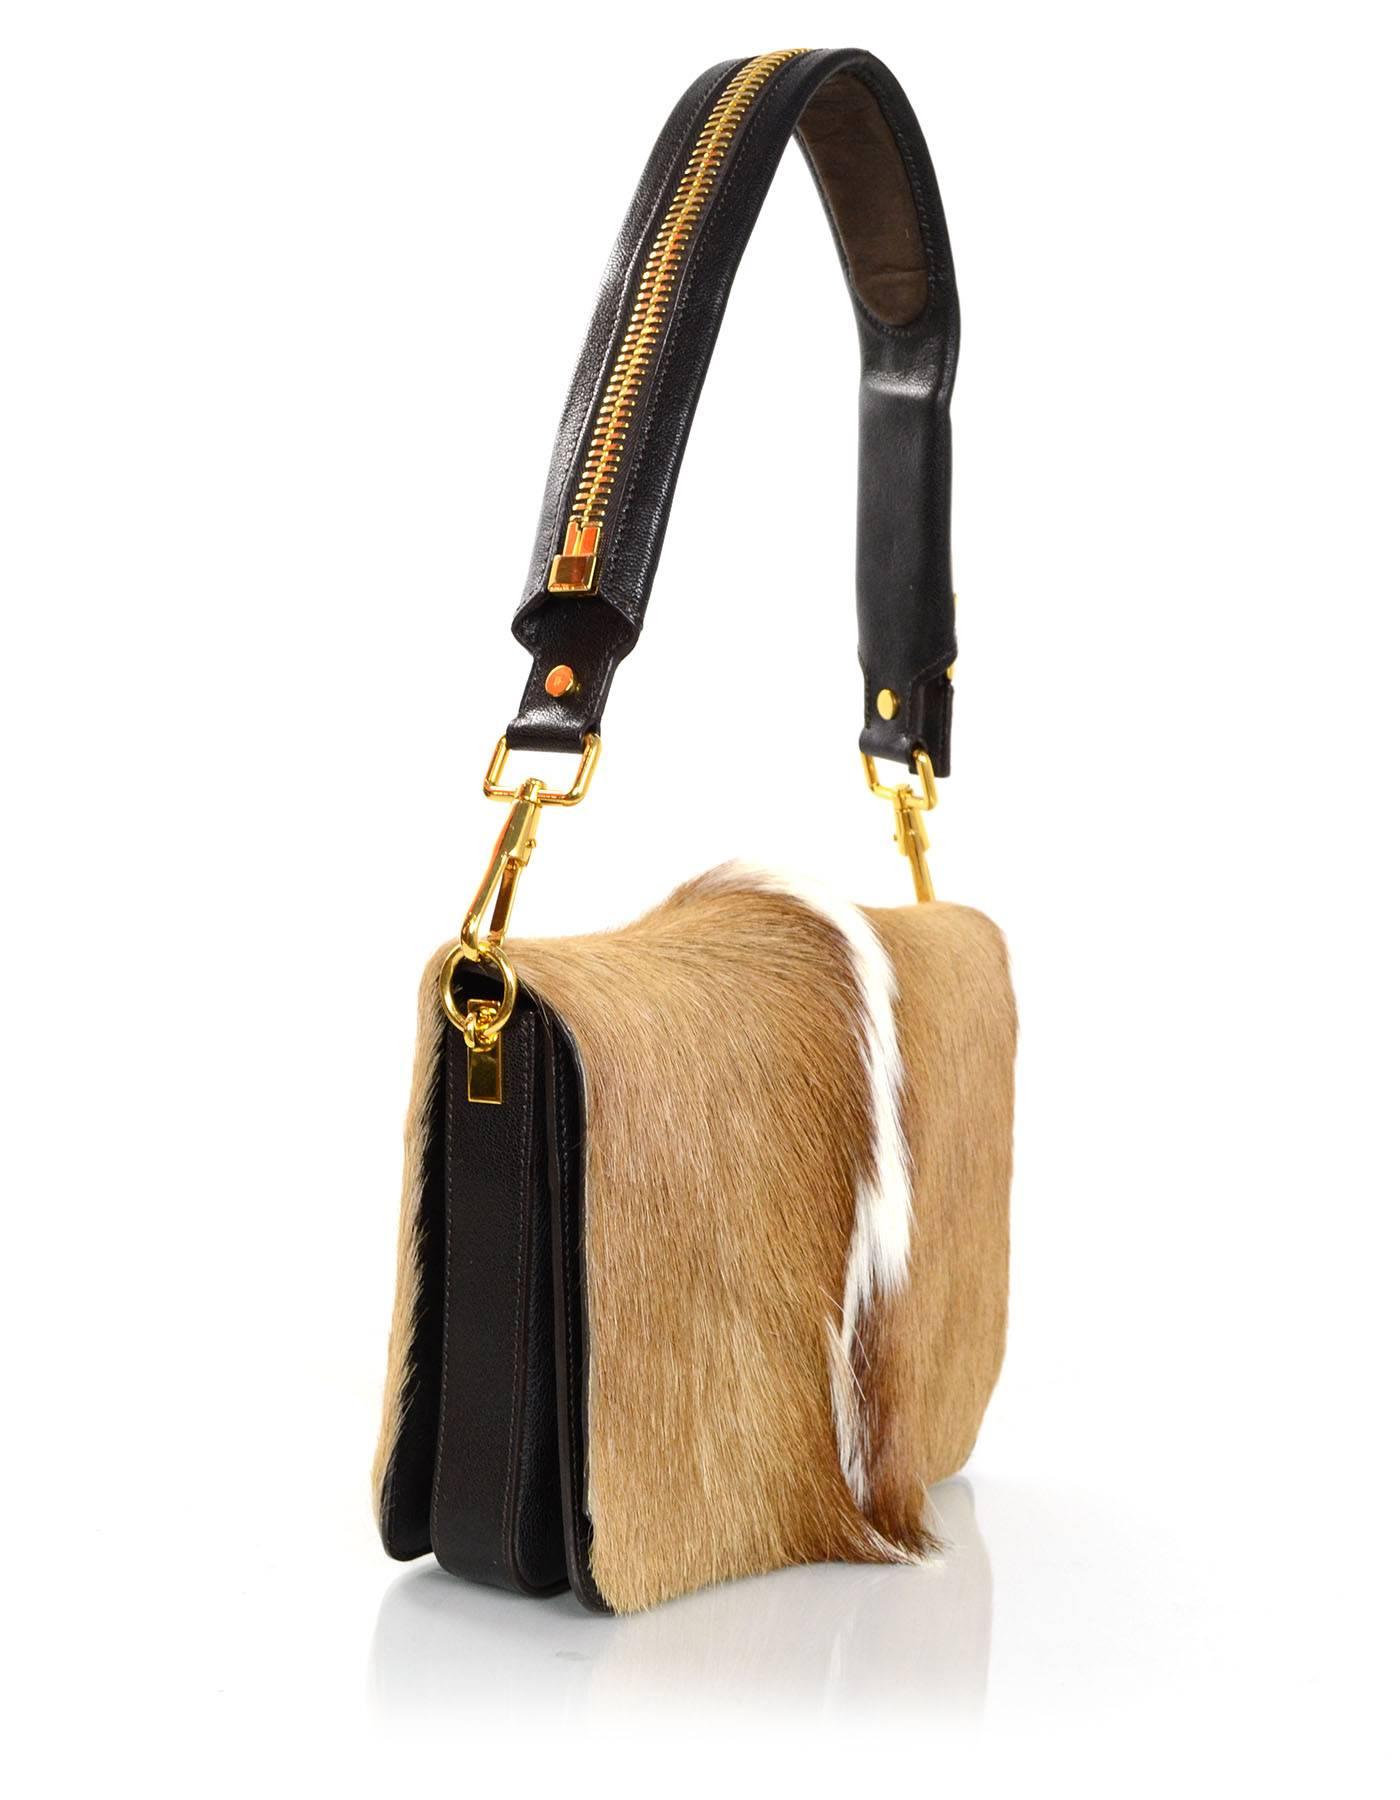 Tom Ford Antelope Fur & Brown Leather Bag 
Features large goldtone decorative zipper on shoulder strap

Made In: Italy
Color: Tan, white and dark brown
Hardware: Goldtone
Materials: Antelope fur and leather
Lining: Brown